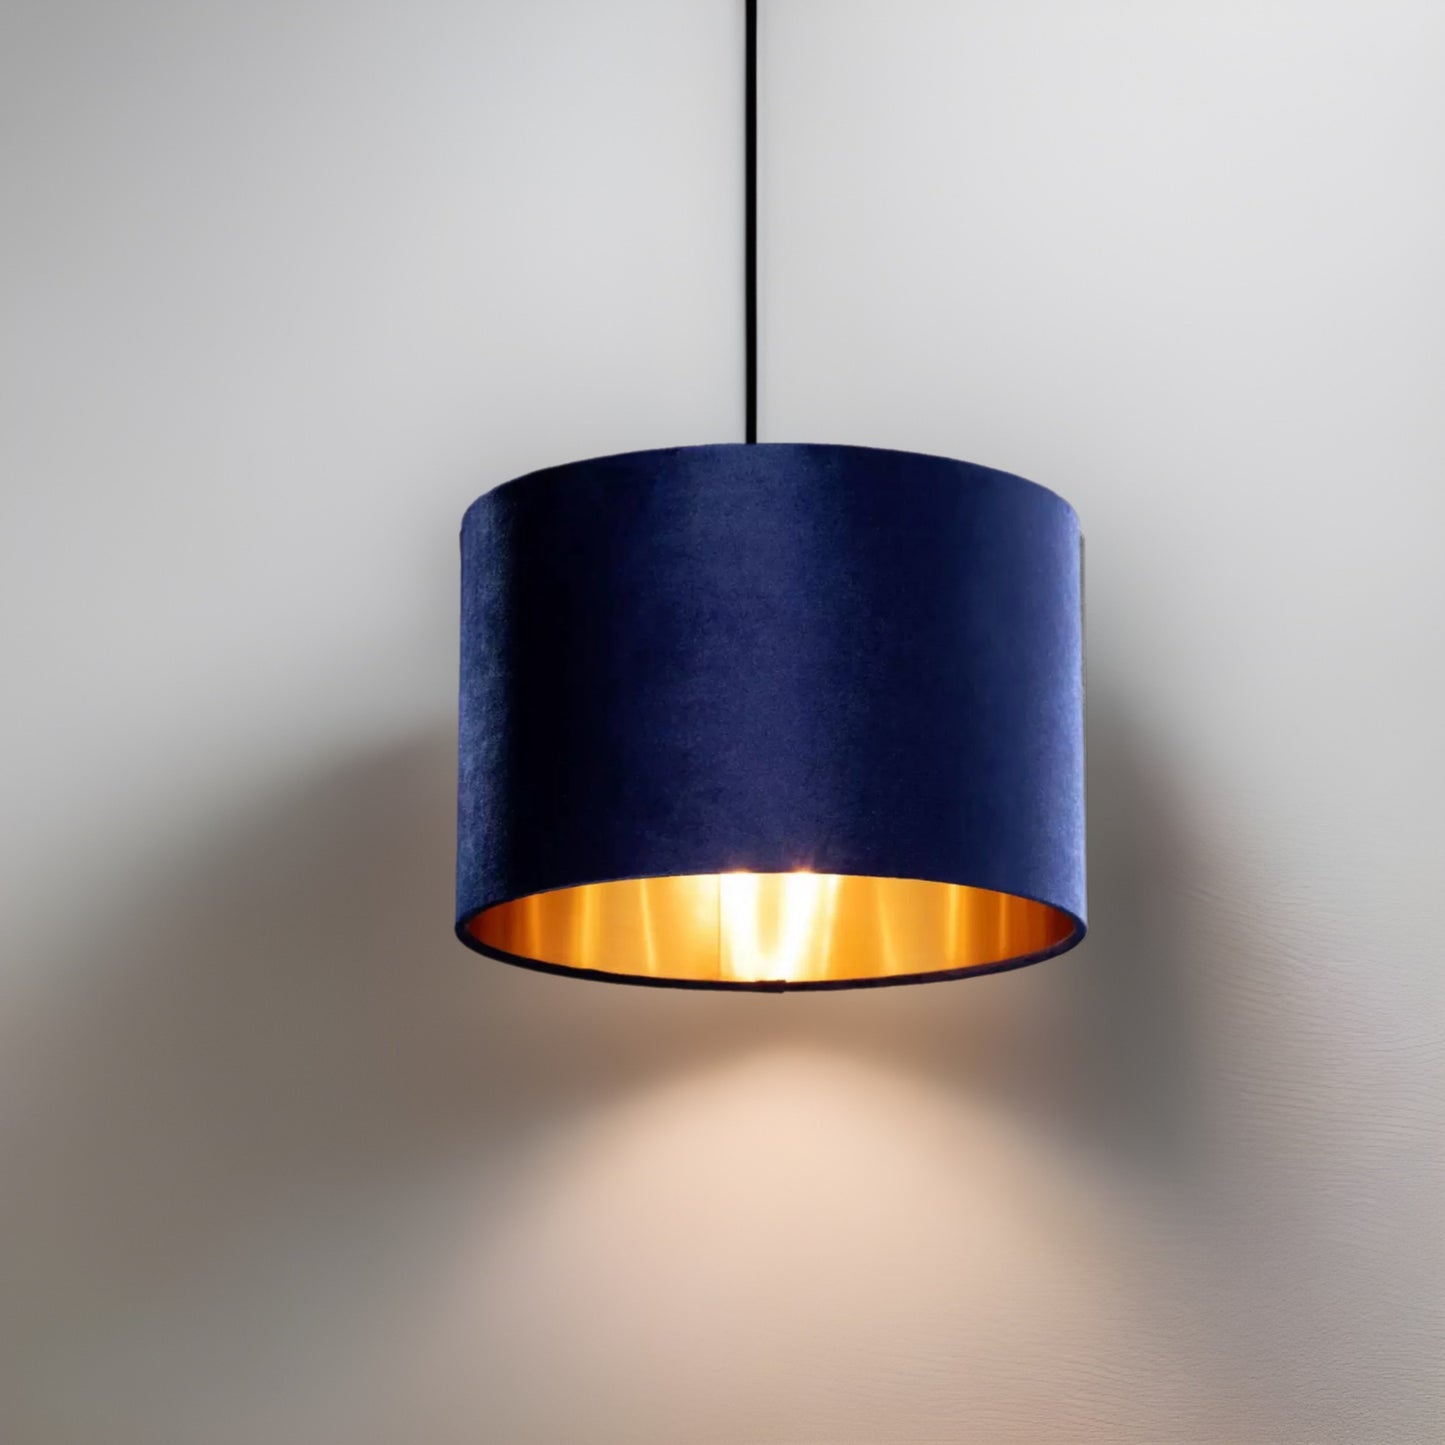 Our Nila velvet shade is sophisticated in appearance and we have designed the shade to  suit a range of interiors. Easy to fit, it’s crafted from high-quality velvet on the outer and has a reflective gold metallic inner. It's made to fit both a ceiling light or lamp base.